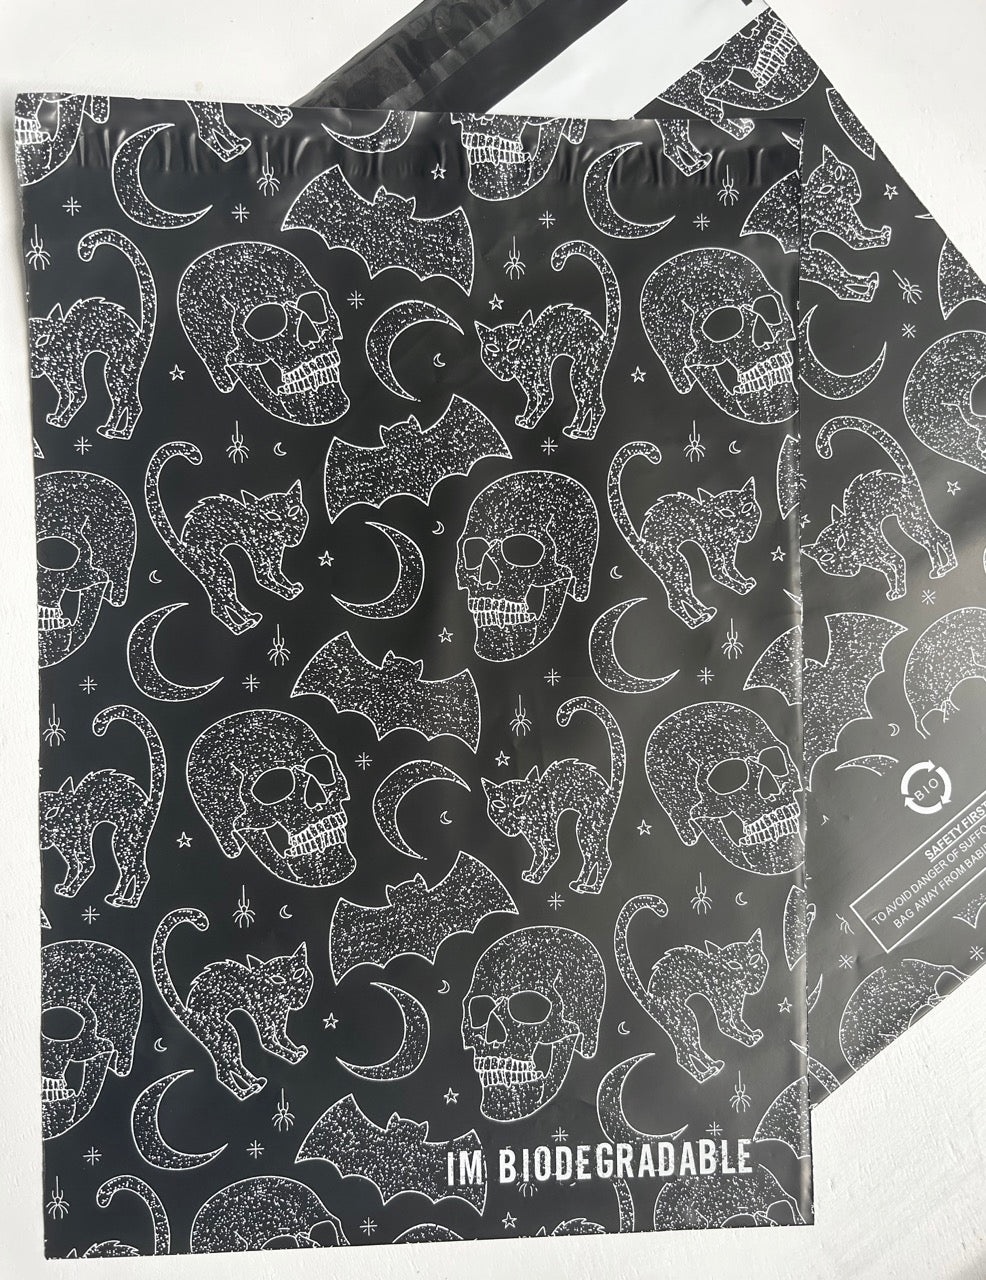 Spooky Biodegradable Poly Mailers